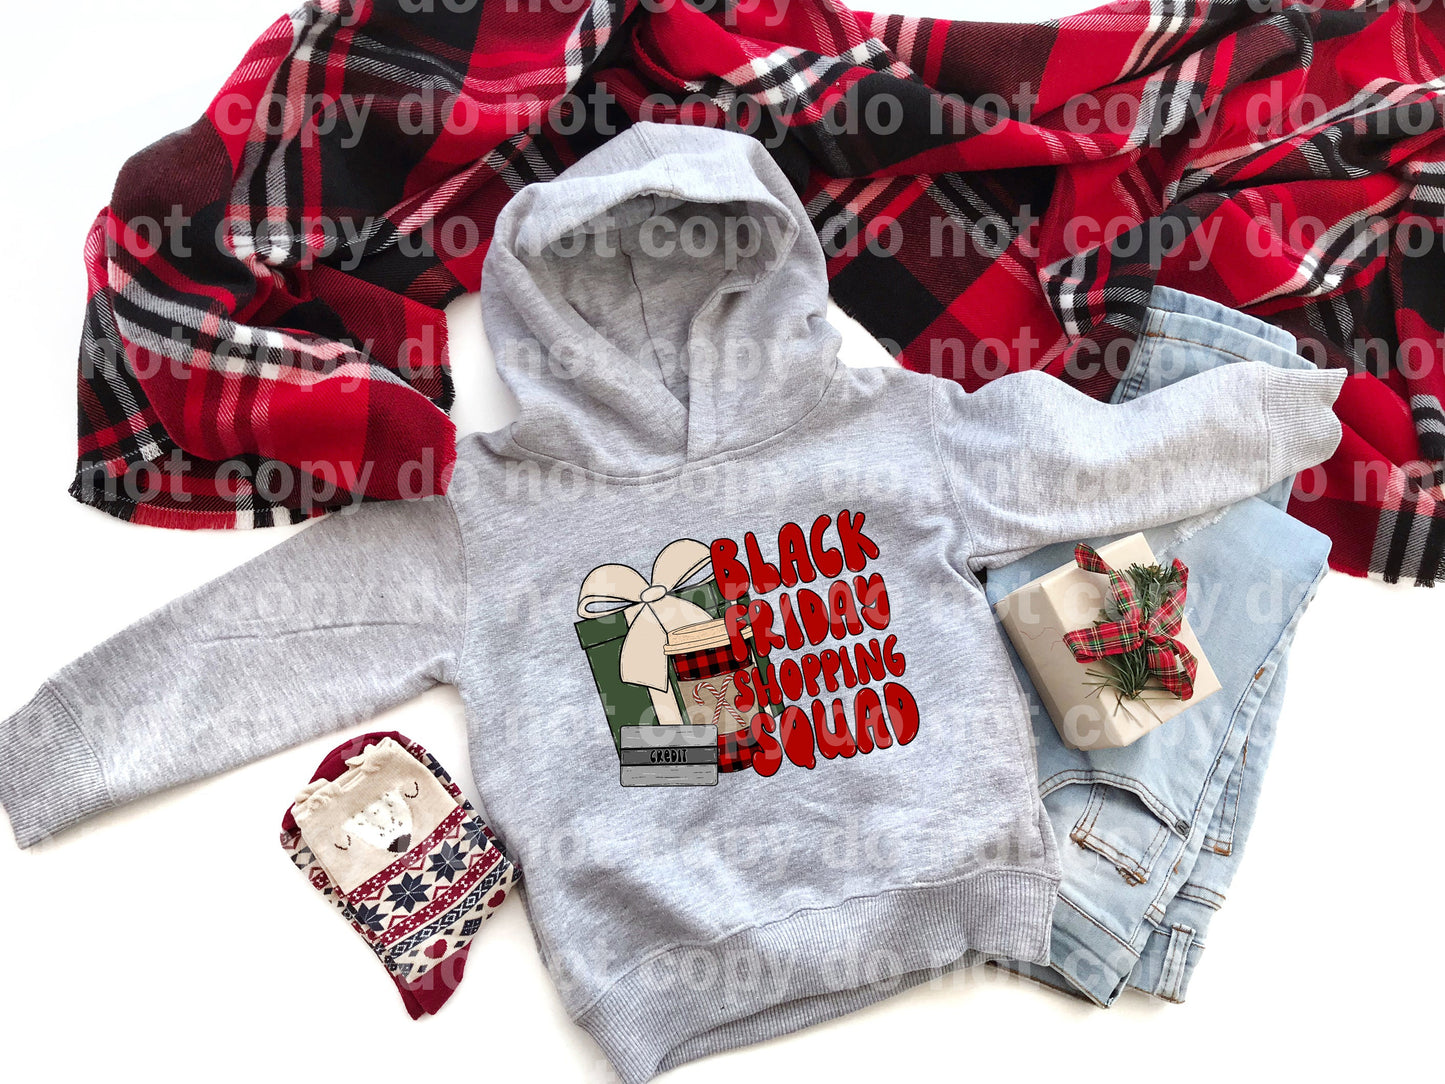 Black Friday Shopping Squad Dream Print or Sublimation Print